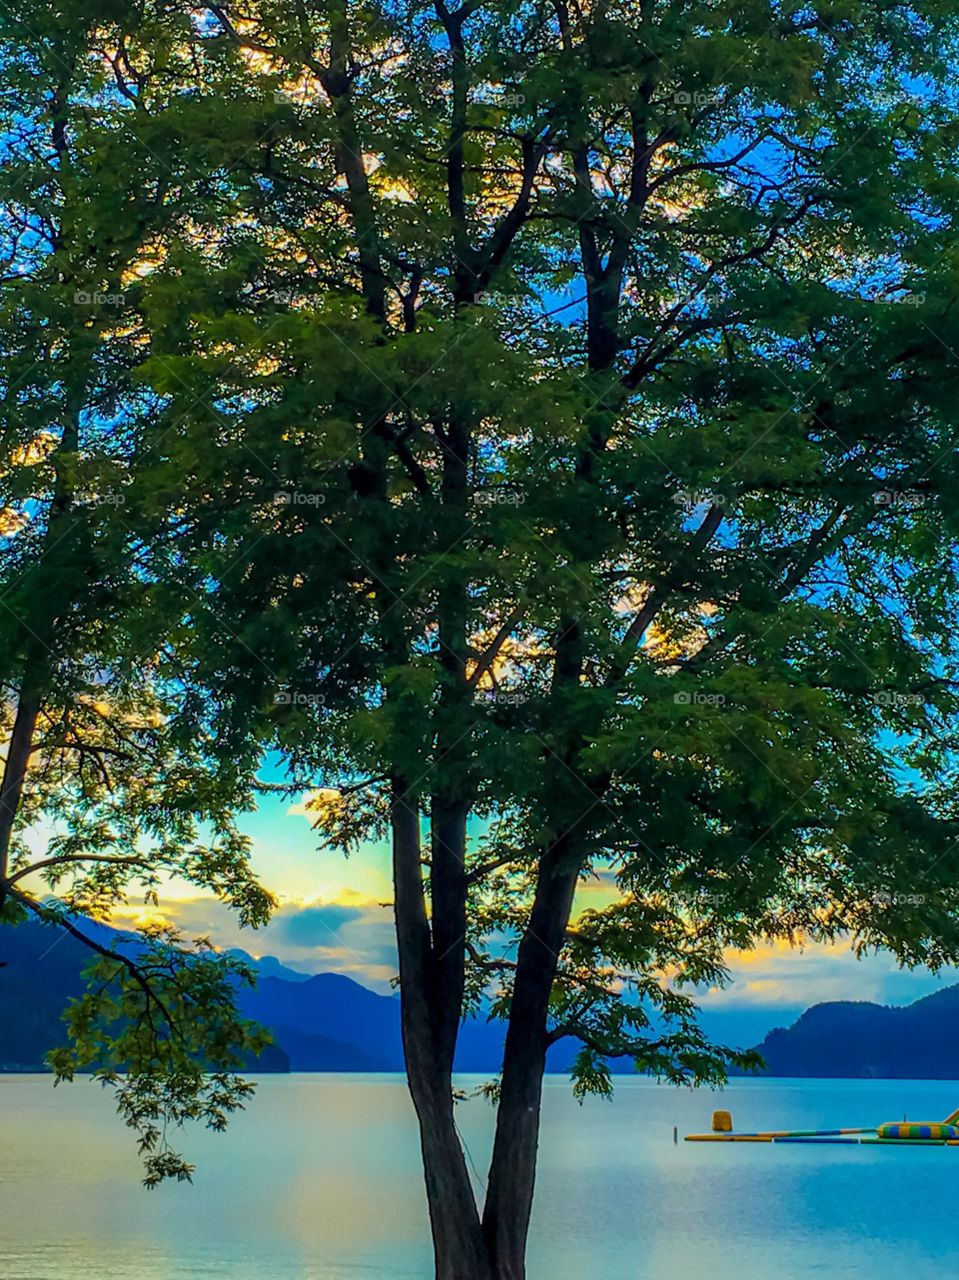 View of beautiful Harrison Lake through a tree silhouette at dusk the golden hour. This view is in front of the beautiful Harrison Hotsprings resort. 